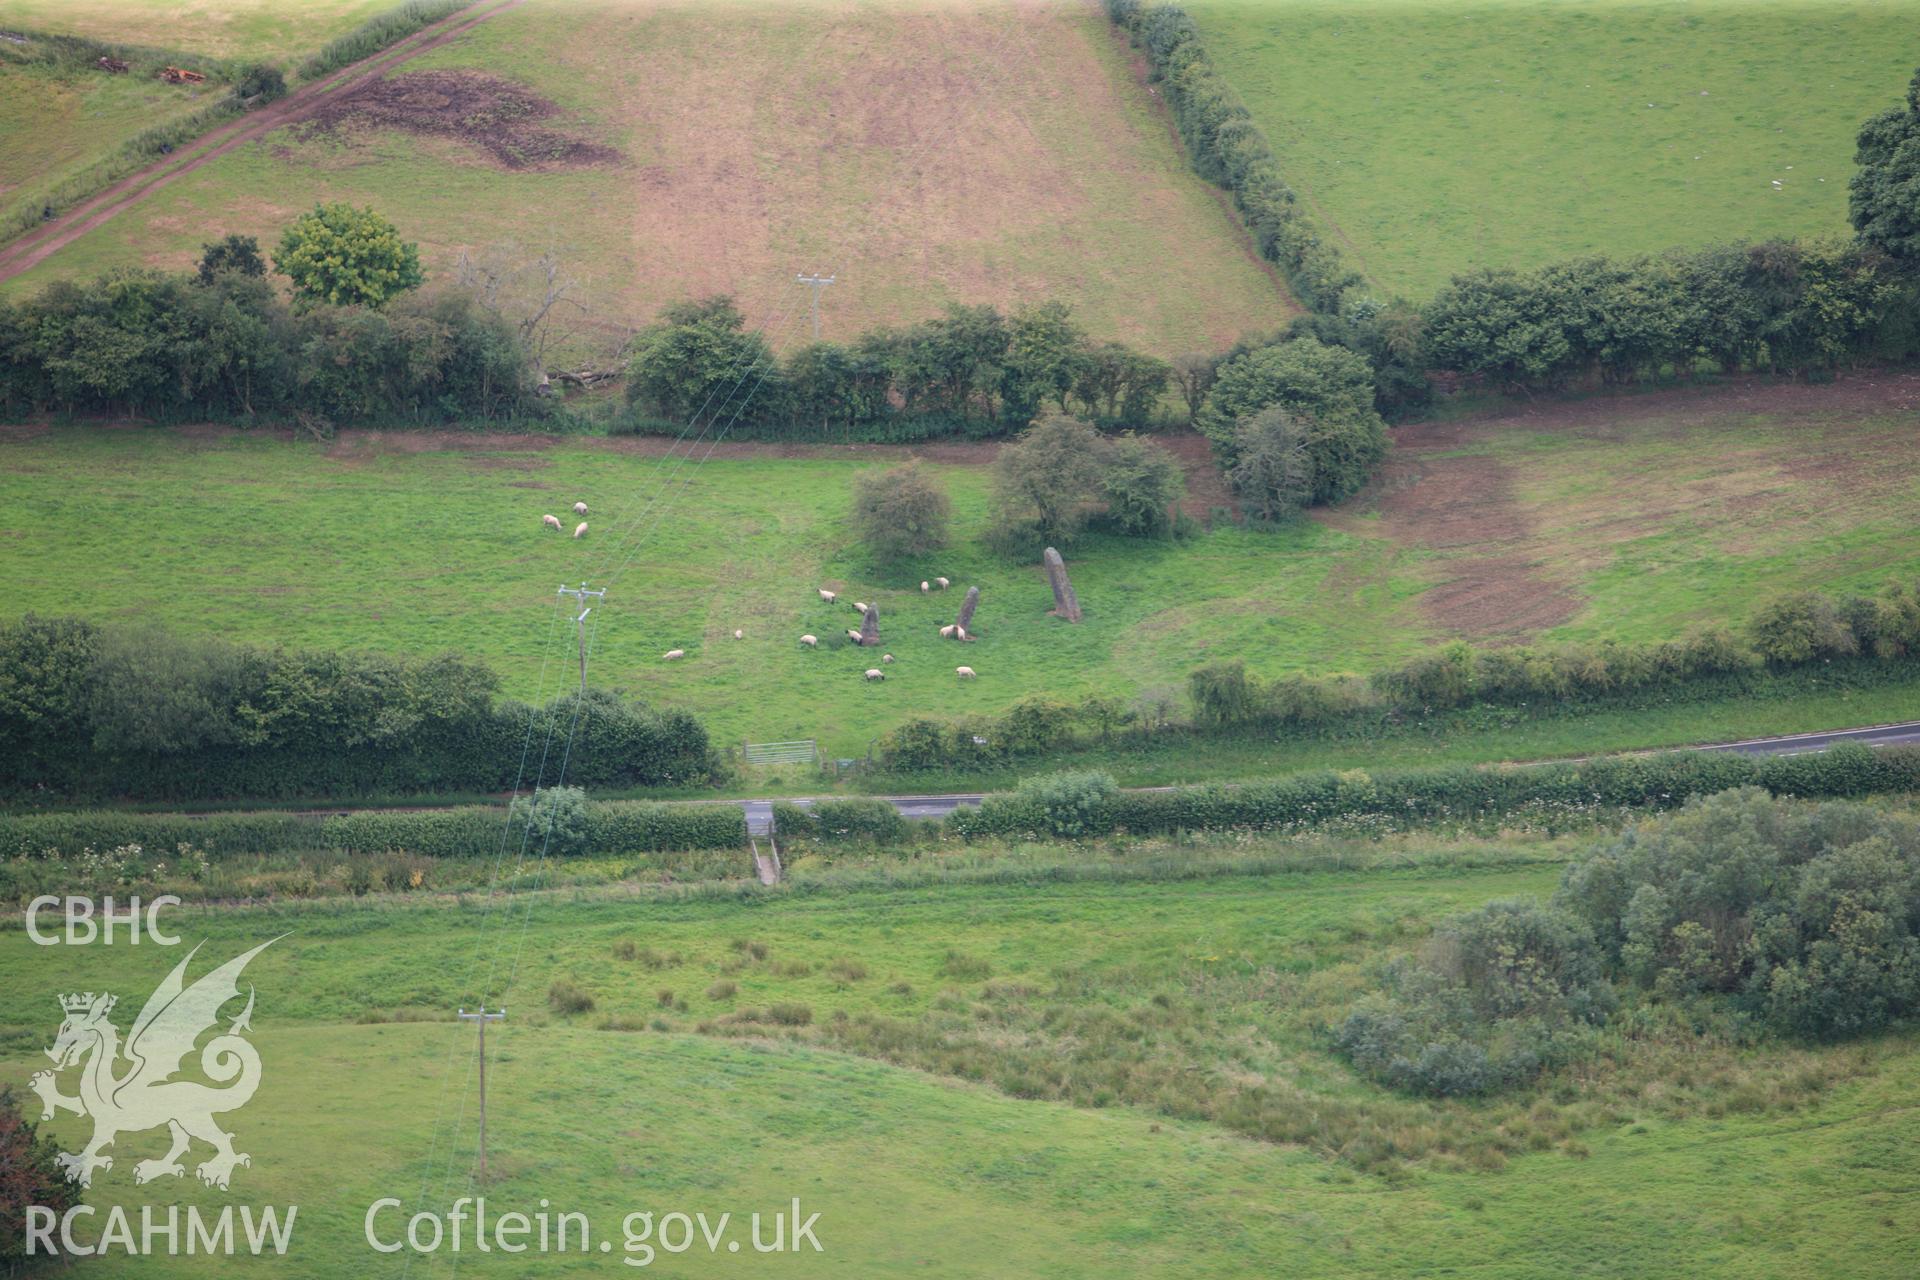 RCAHMW colour oblique photograph of Harold's Stones, alignment. Taken by Toby Driver on 20/07/2011.